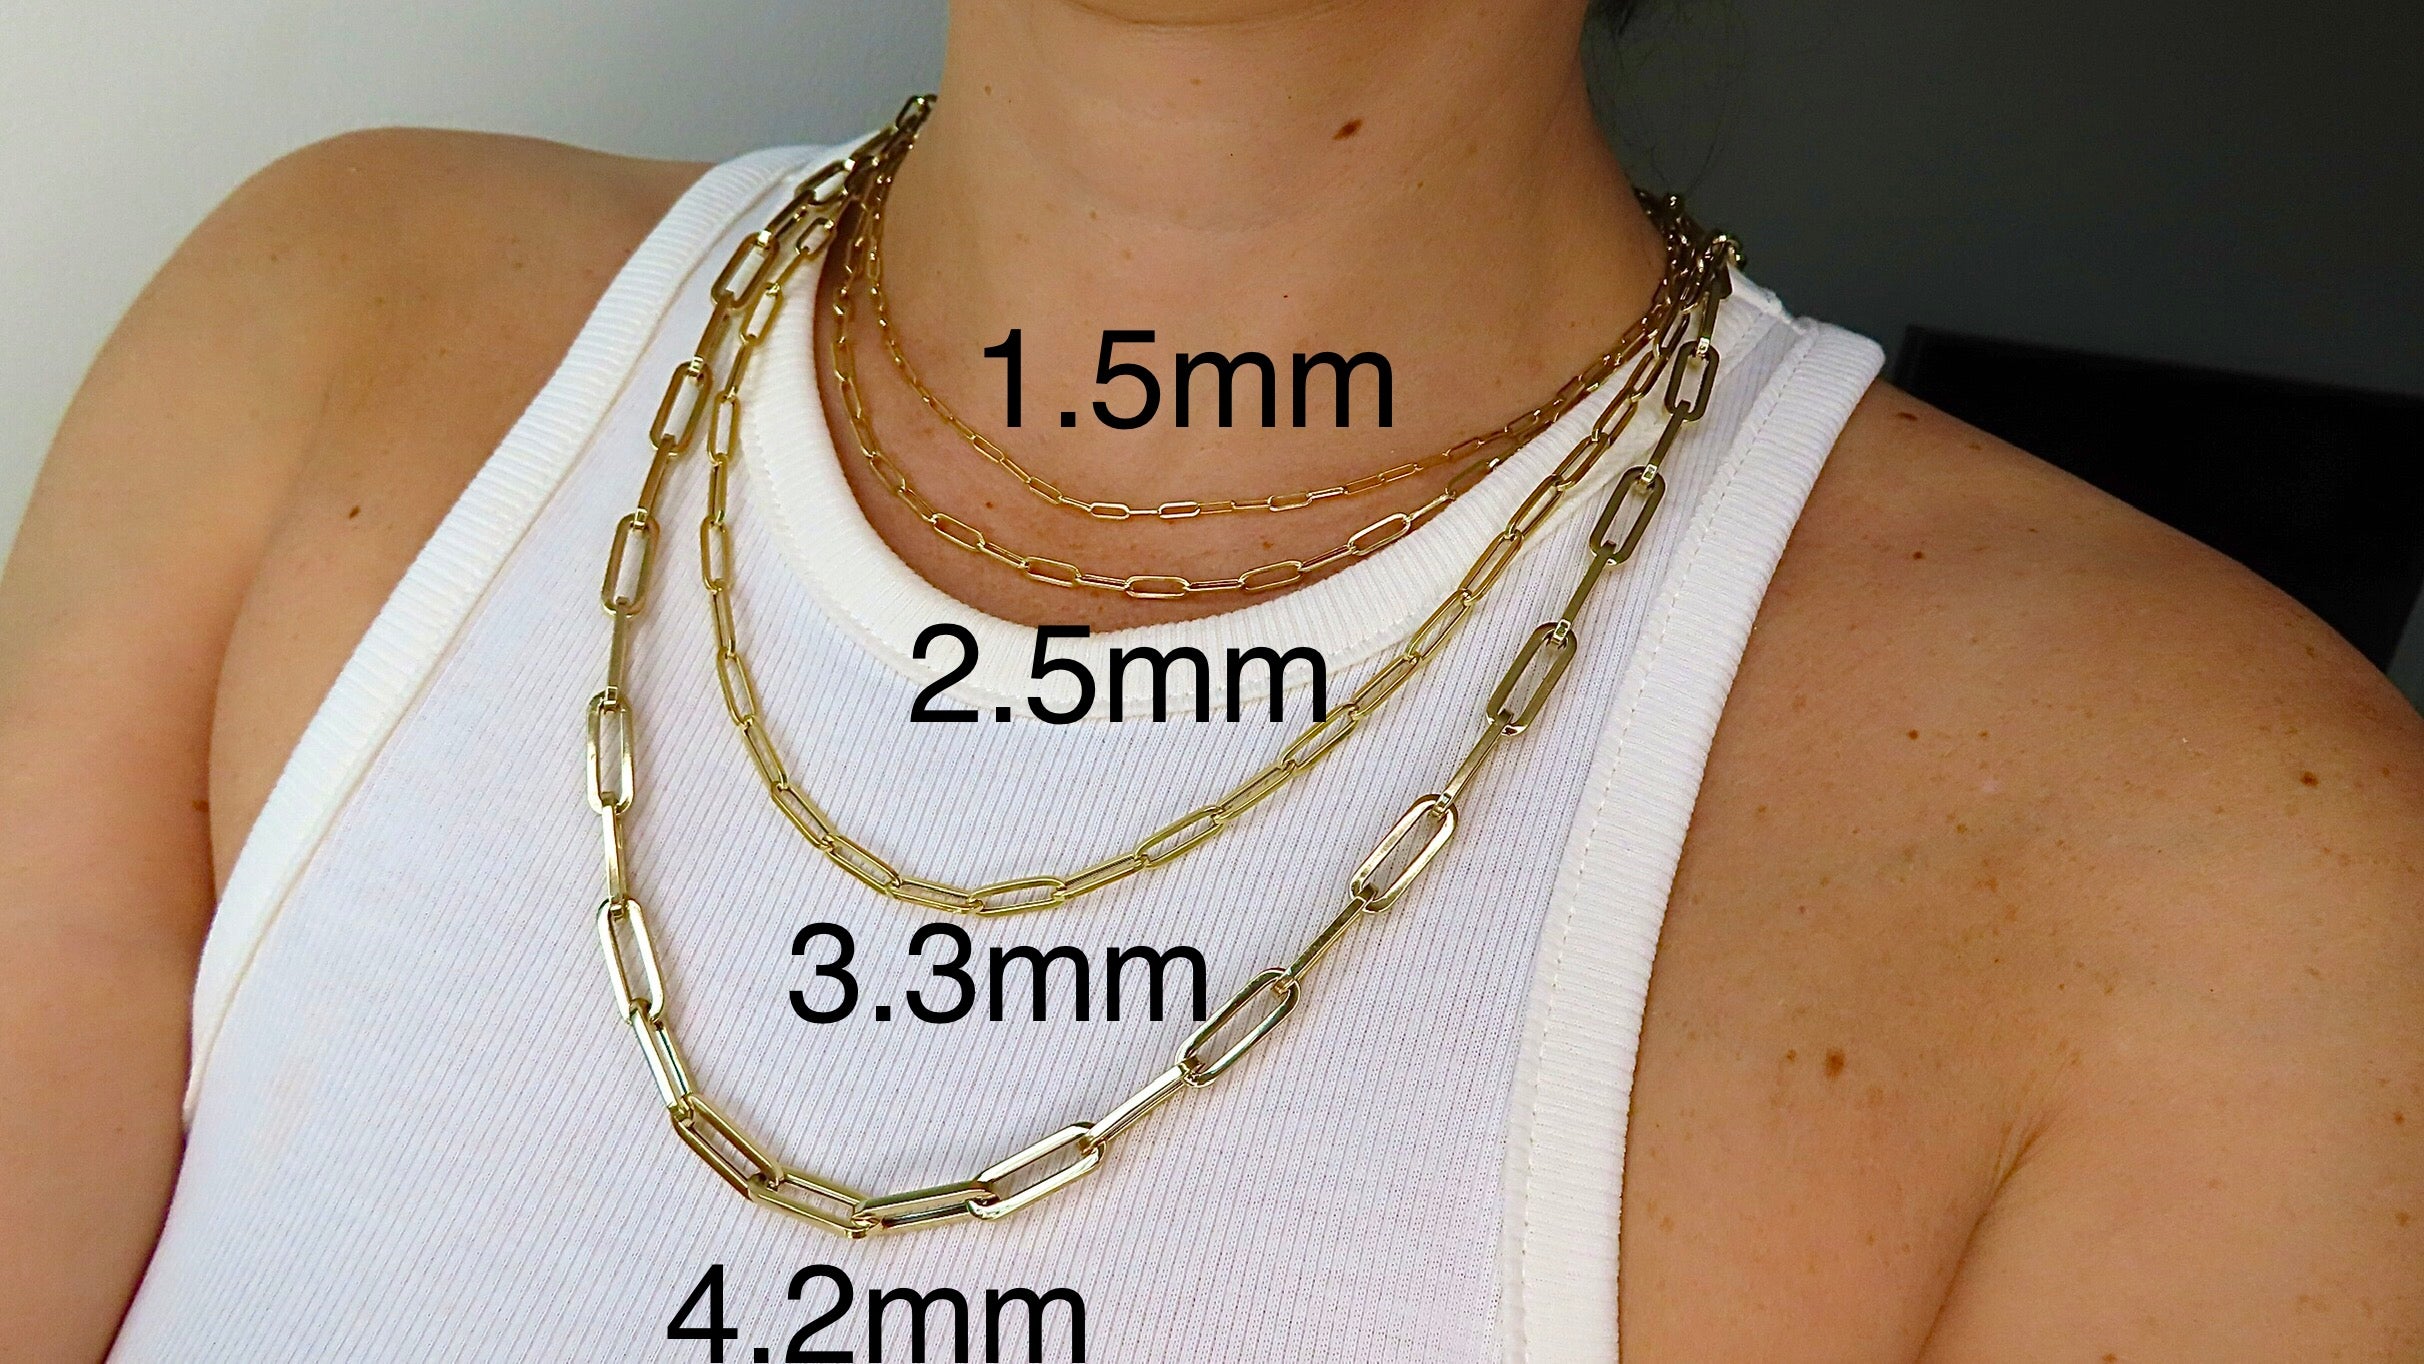 Paperclip Chain Necklace In 14K Solid Yellow Gold, 16 18 20 24 Length  ,1.5mm 2.5mm 3.3mm 4.2mm Width